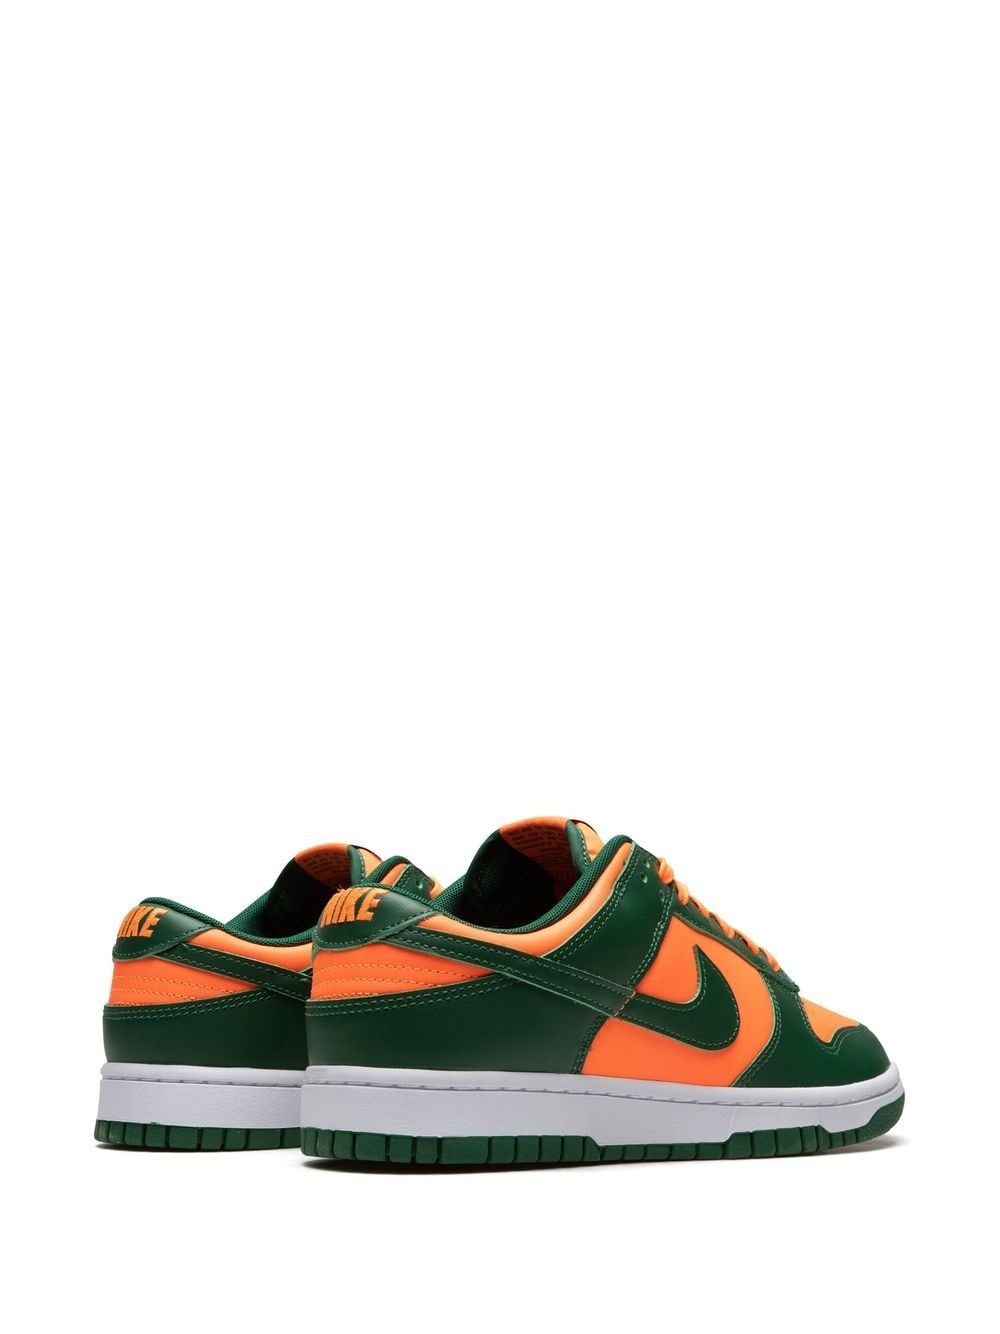 Dunk Low "Miami Hurricanes" sneakers - 3